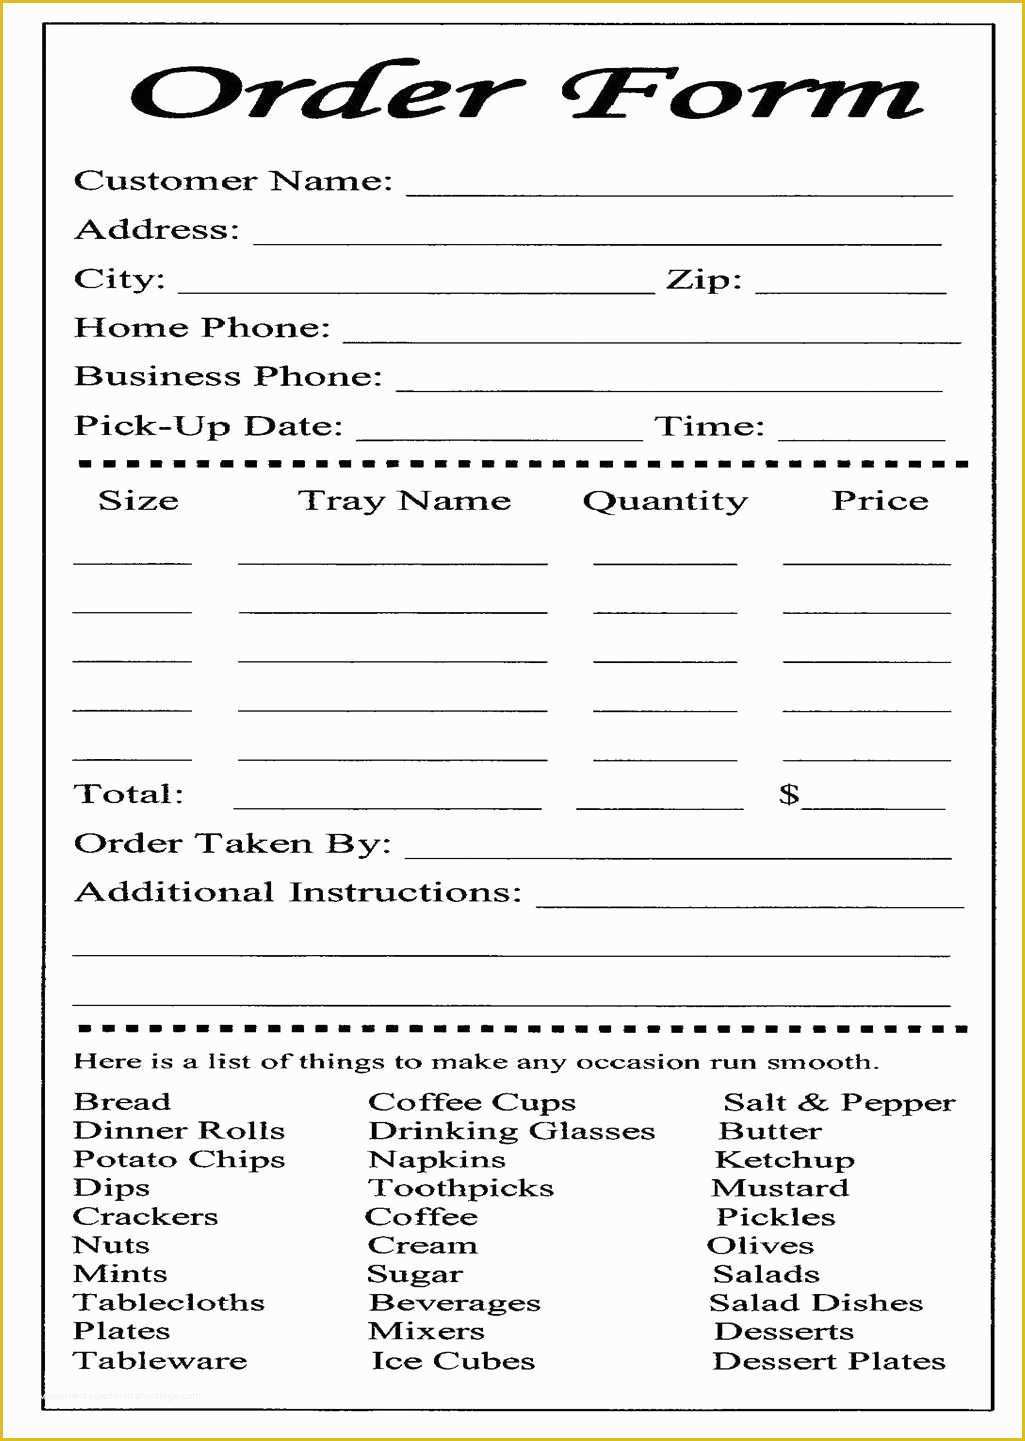 Order Form Template Free Download Of Cake Ball Order Form Templates 